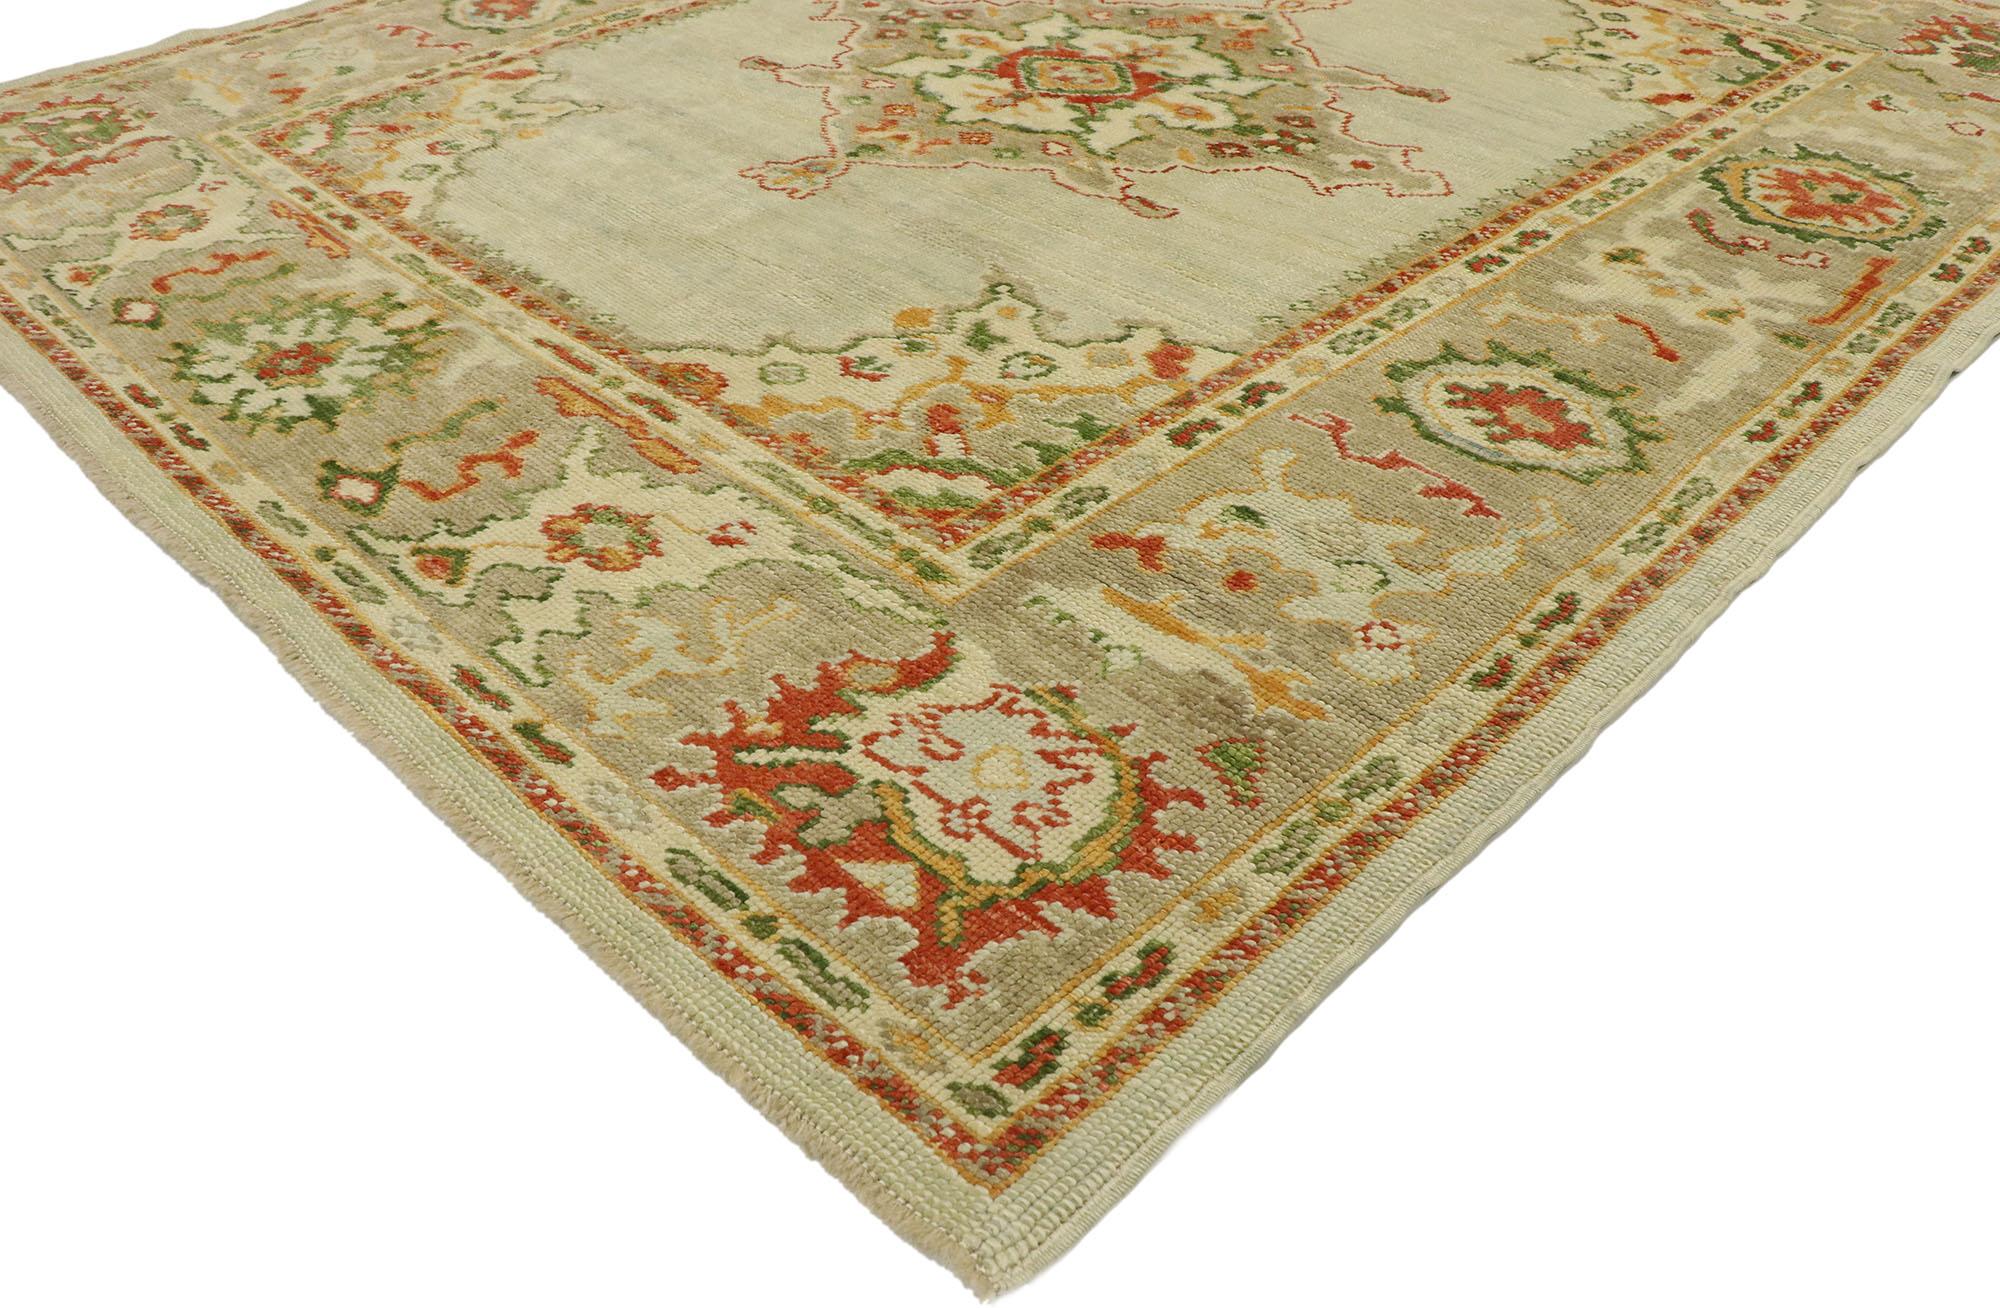 53159 New Contemporary Turkish Oushak rug with Modern Eclectic Craftsman style. Combining modern design and architectural elements of naturalist forms in earth-inspired colors, this hand knotted wool contemporary Turkish Oushak rug beautifully